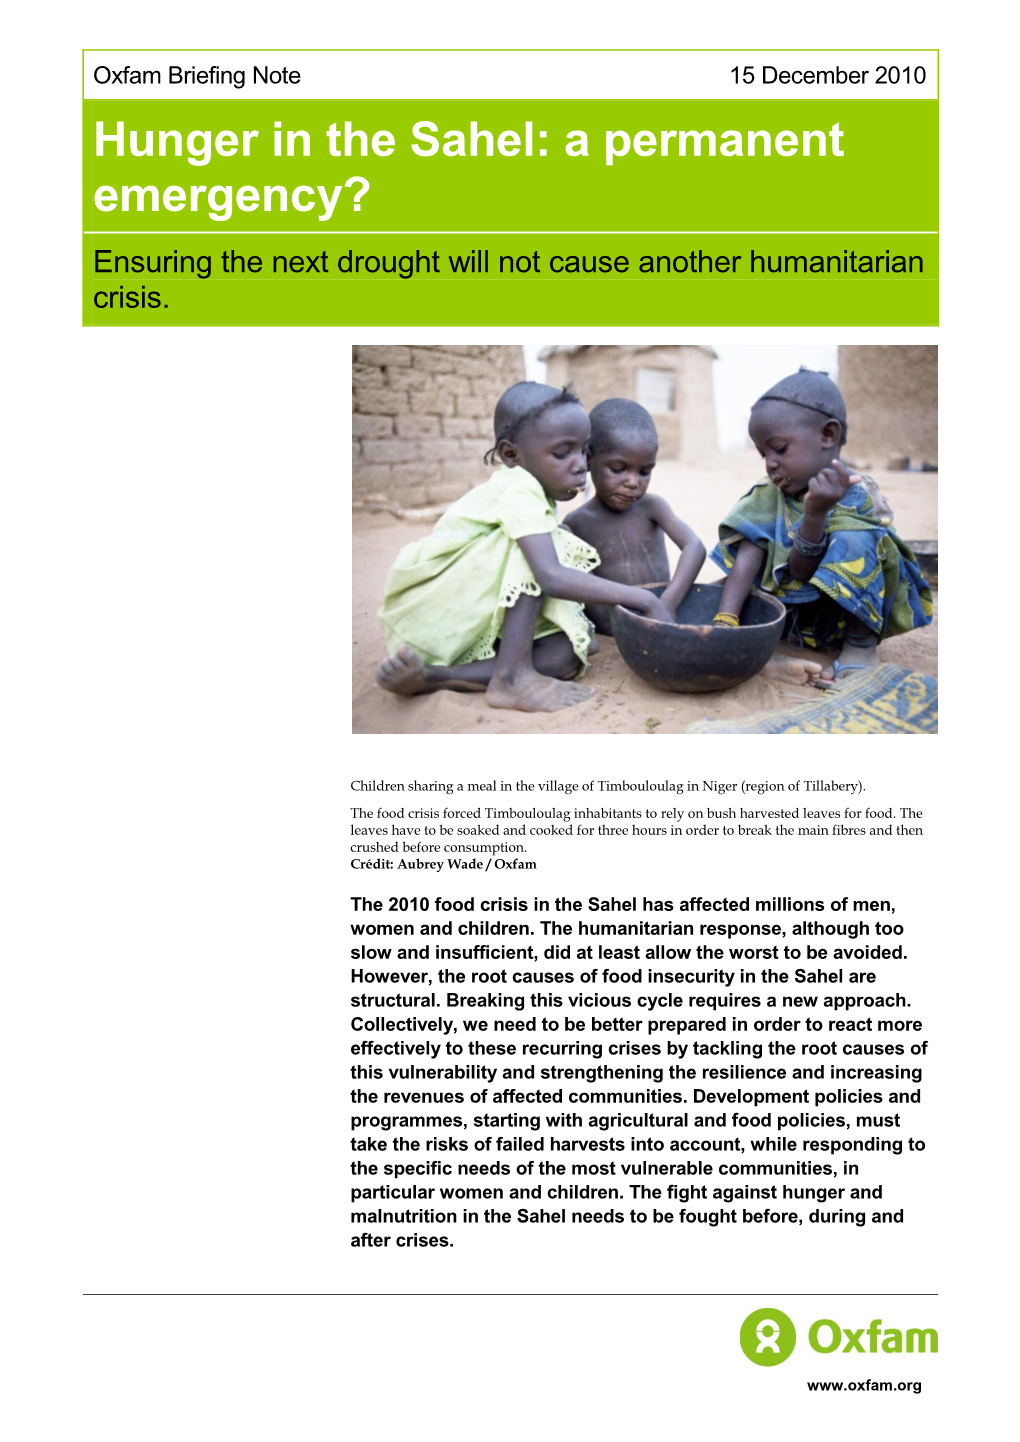 Hunger in the Sahel: a Permanent Emergency? Ensuring the Next Drought Will Not Cause Another Humanitarian Crisis